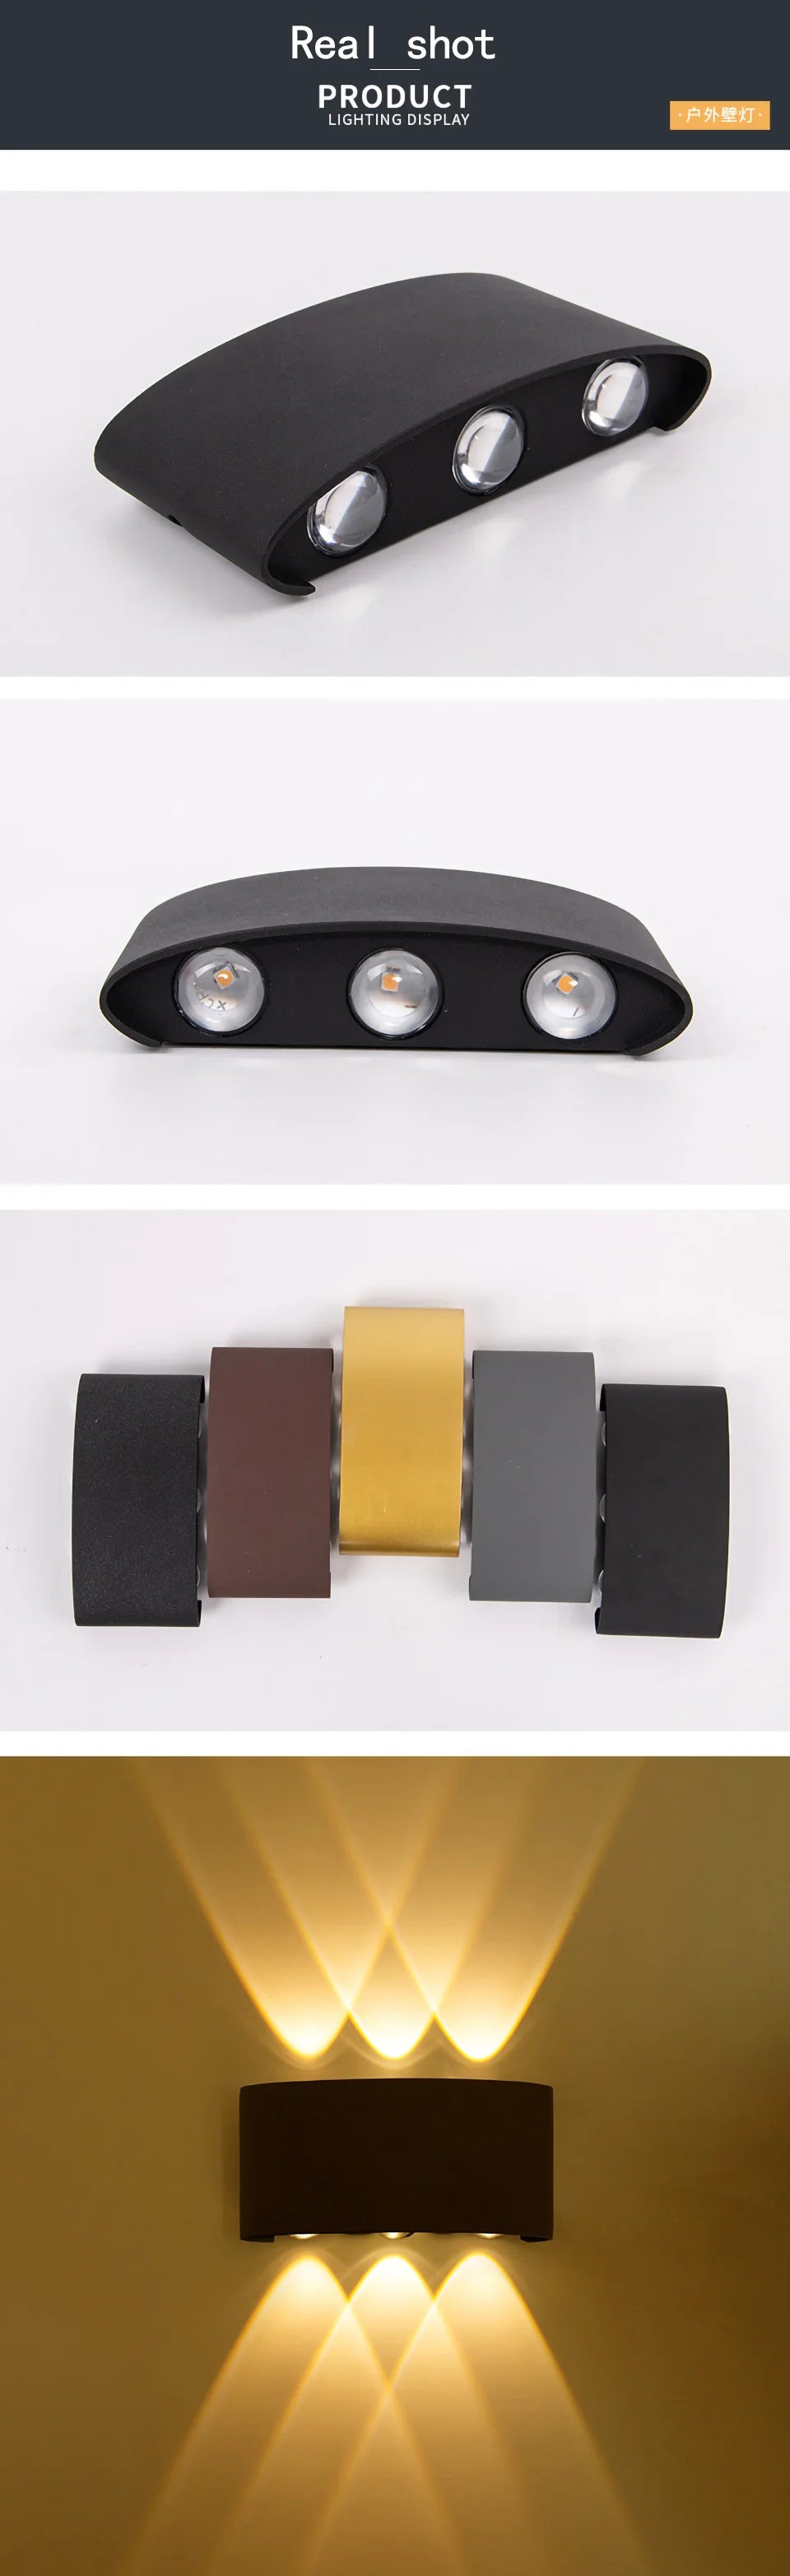 Waterproof LED lamp for indoor/outdoor use with aluminum construction and IP65 rating.